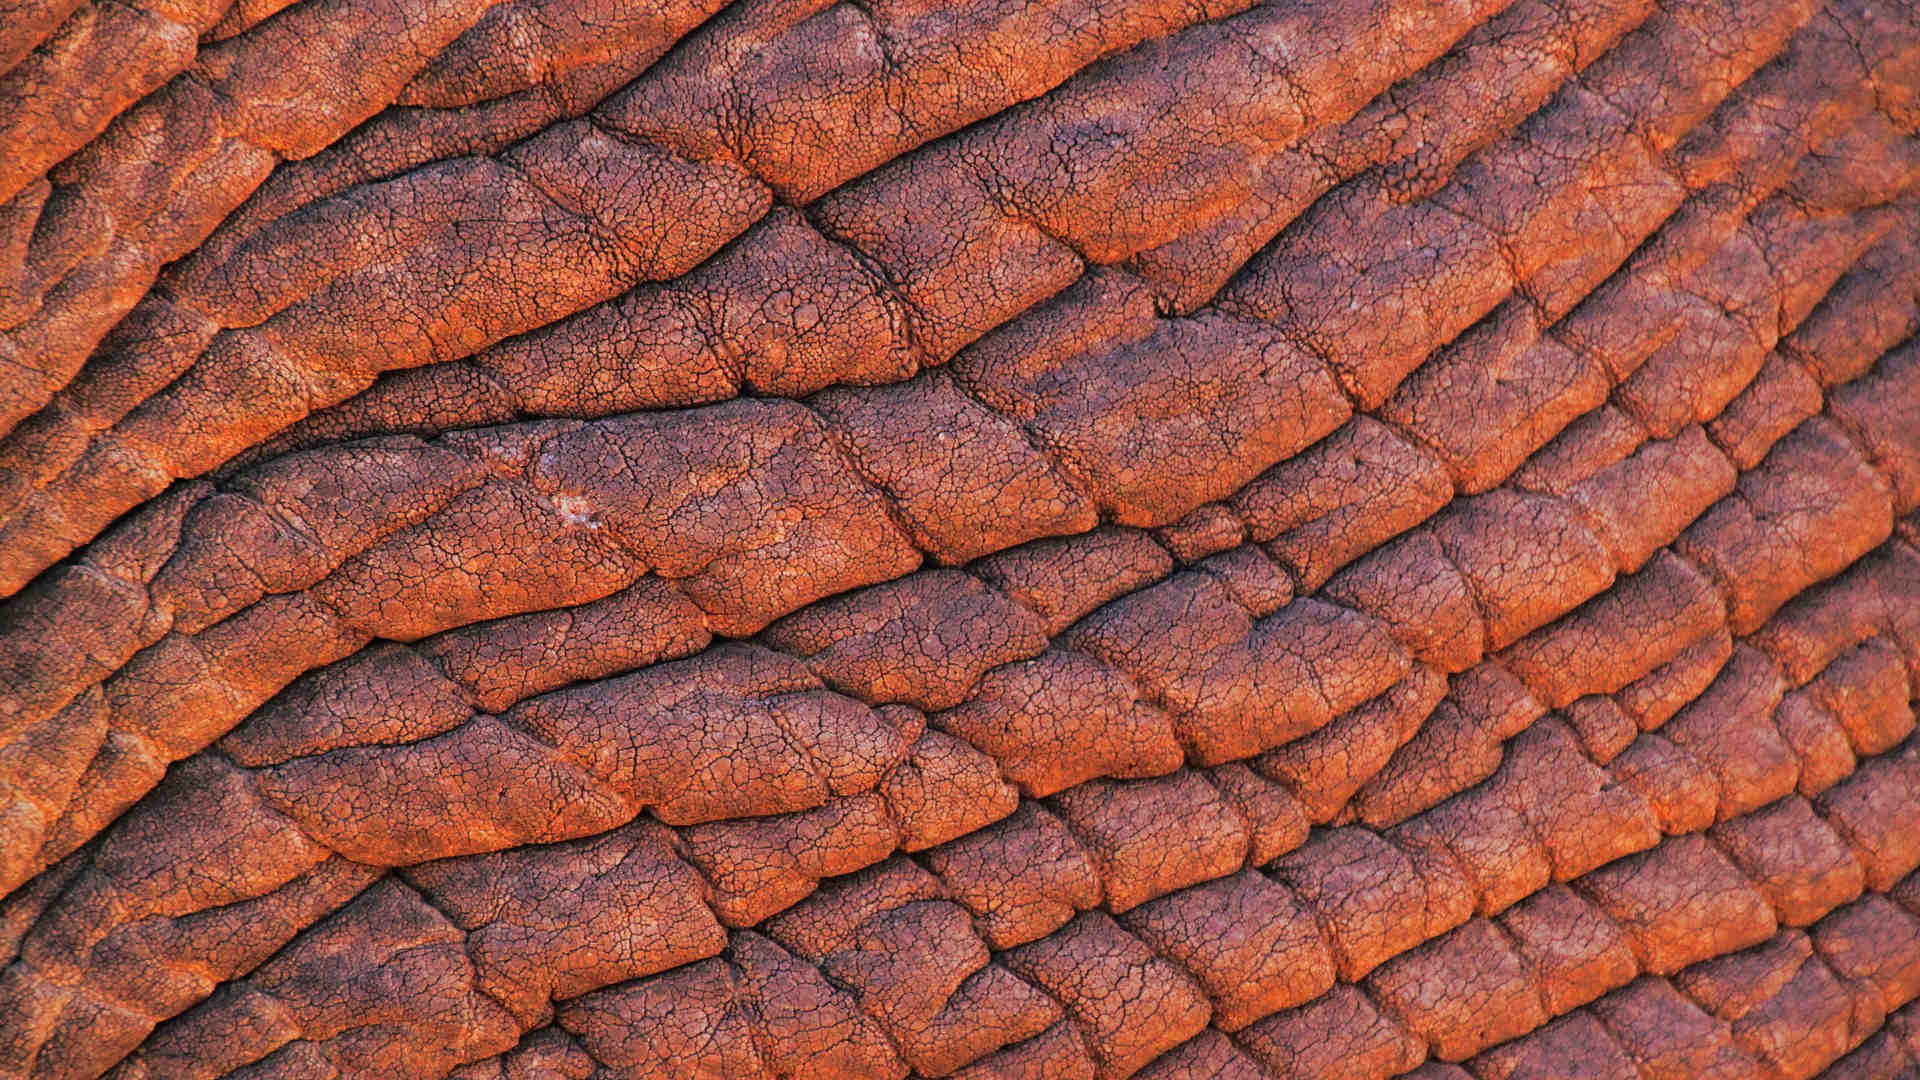 Close up picture of dry, wrinkled elephant skin